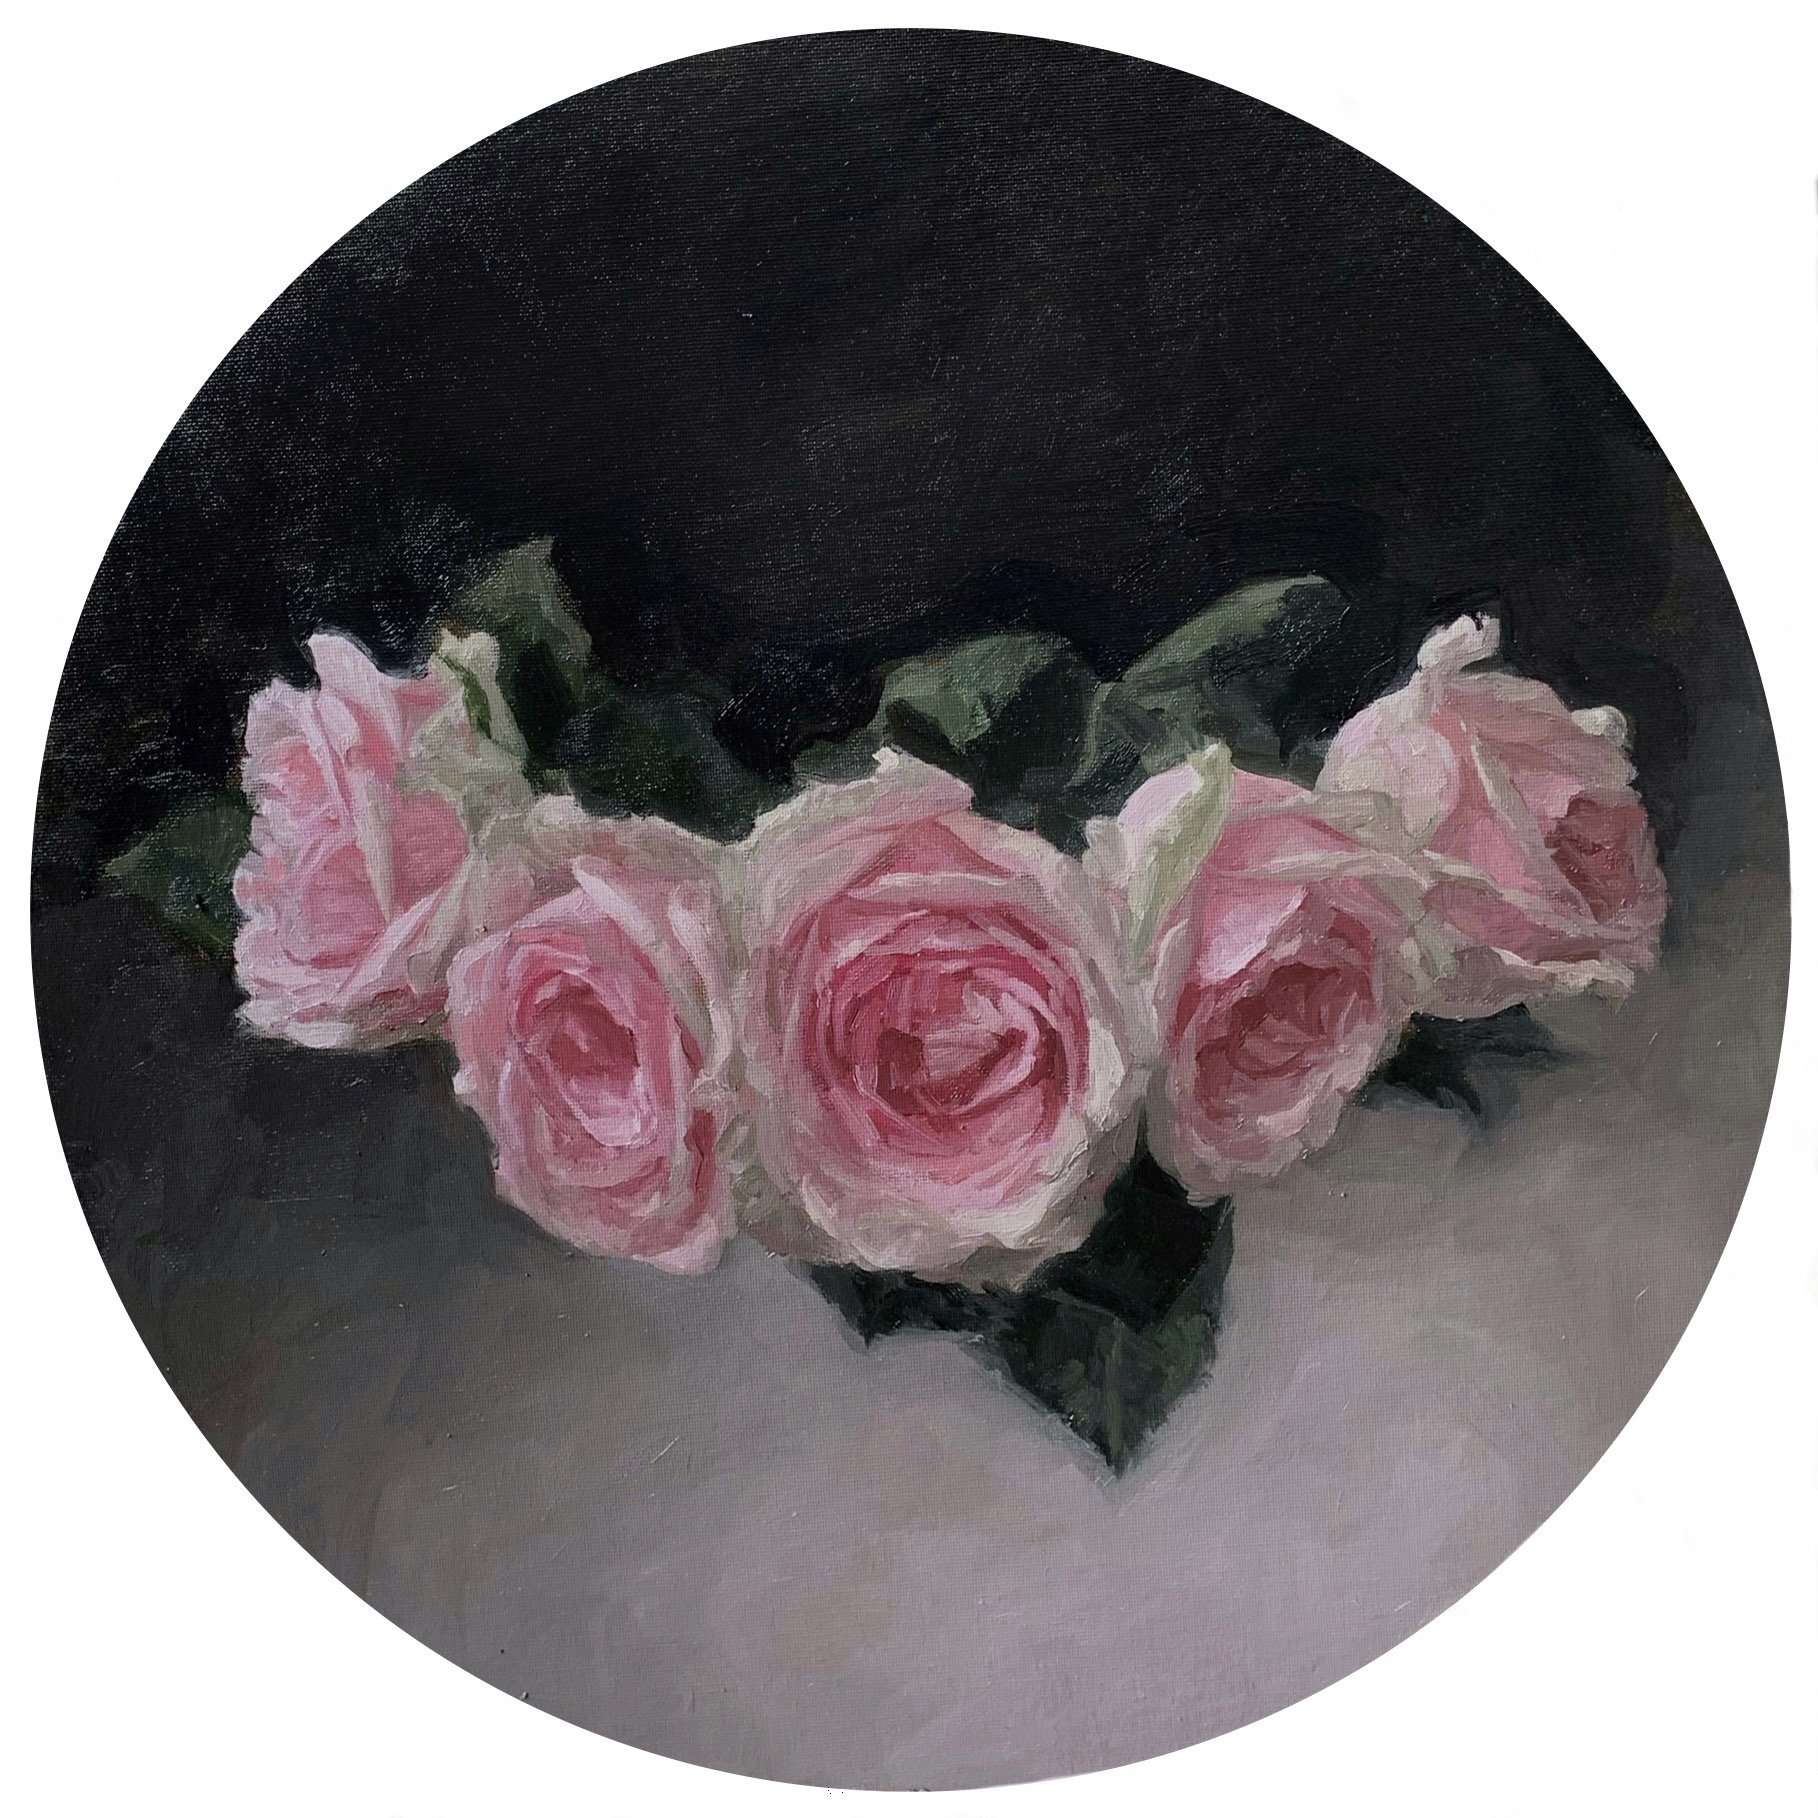   Five roses,  oil on board  